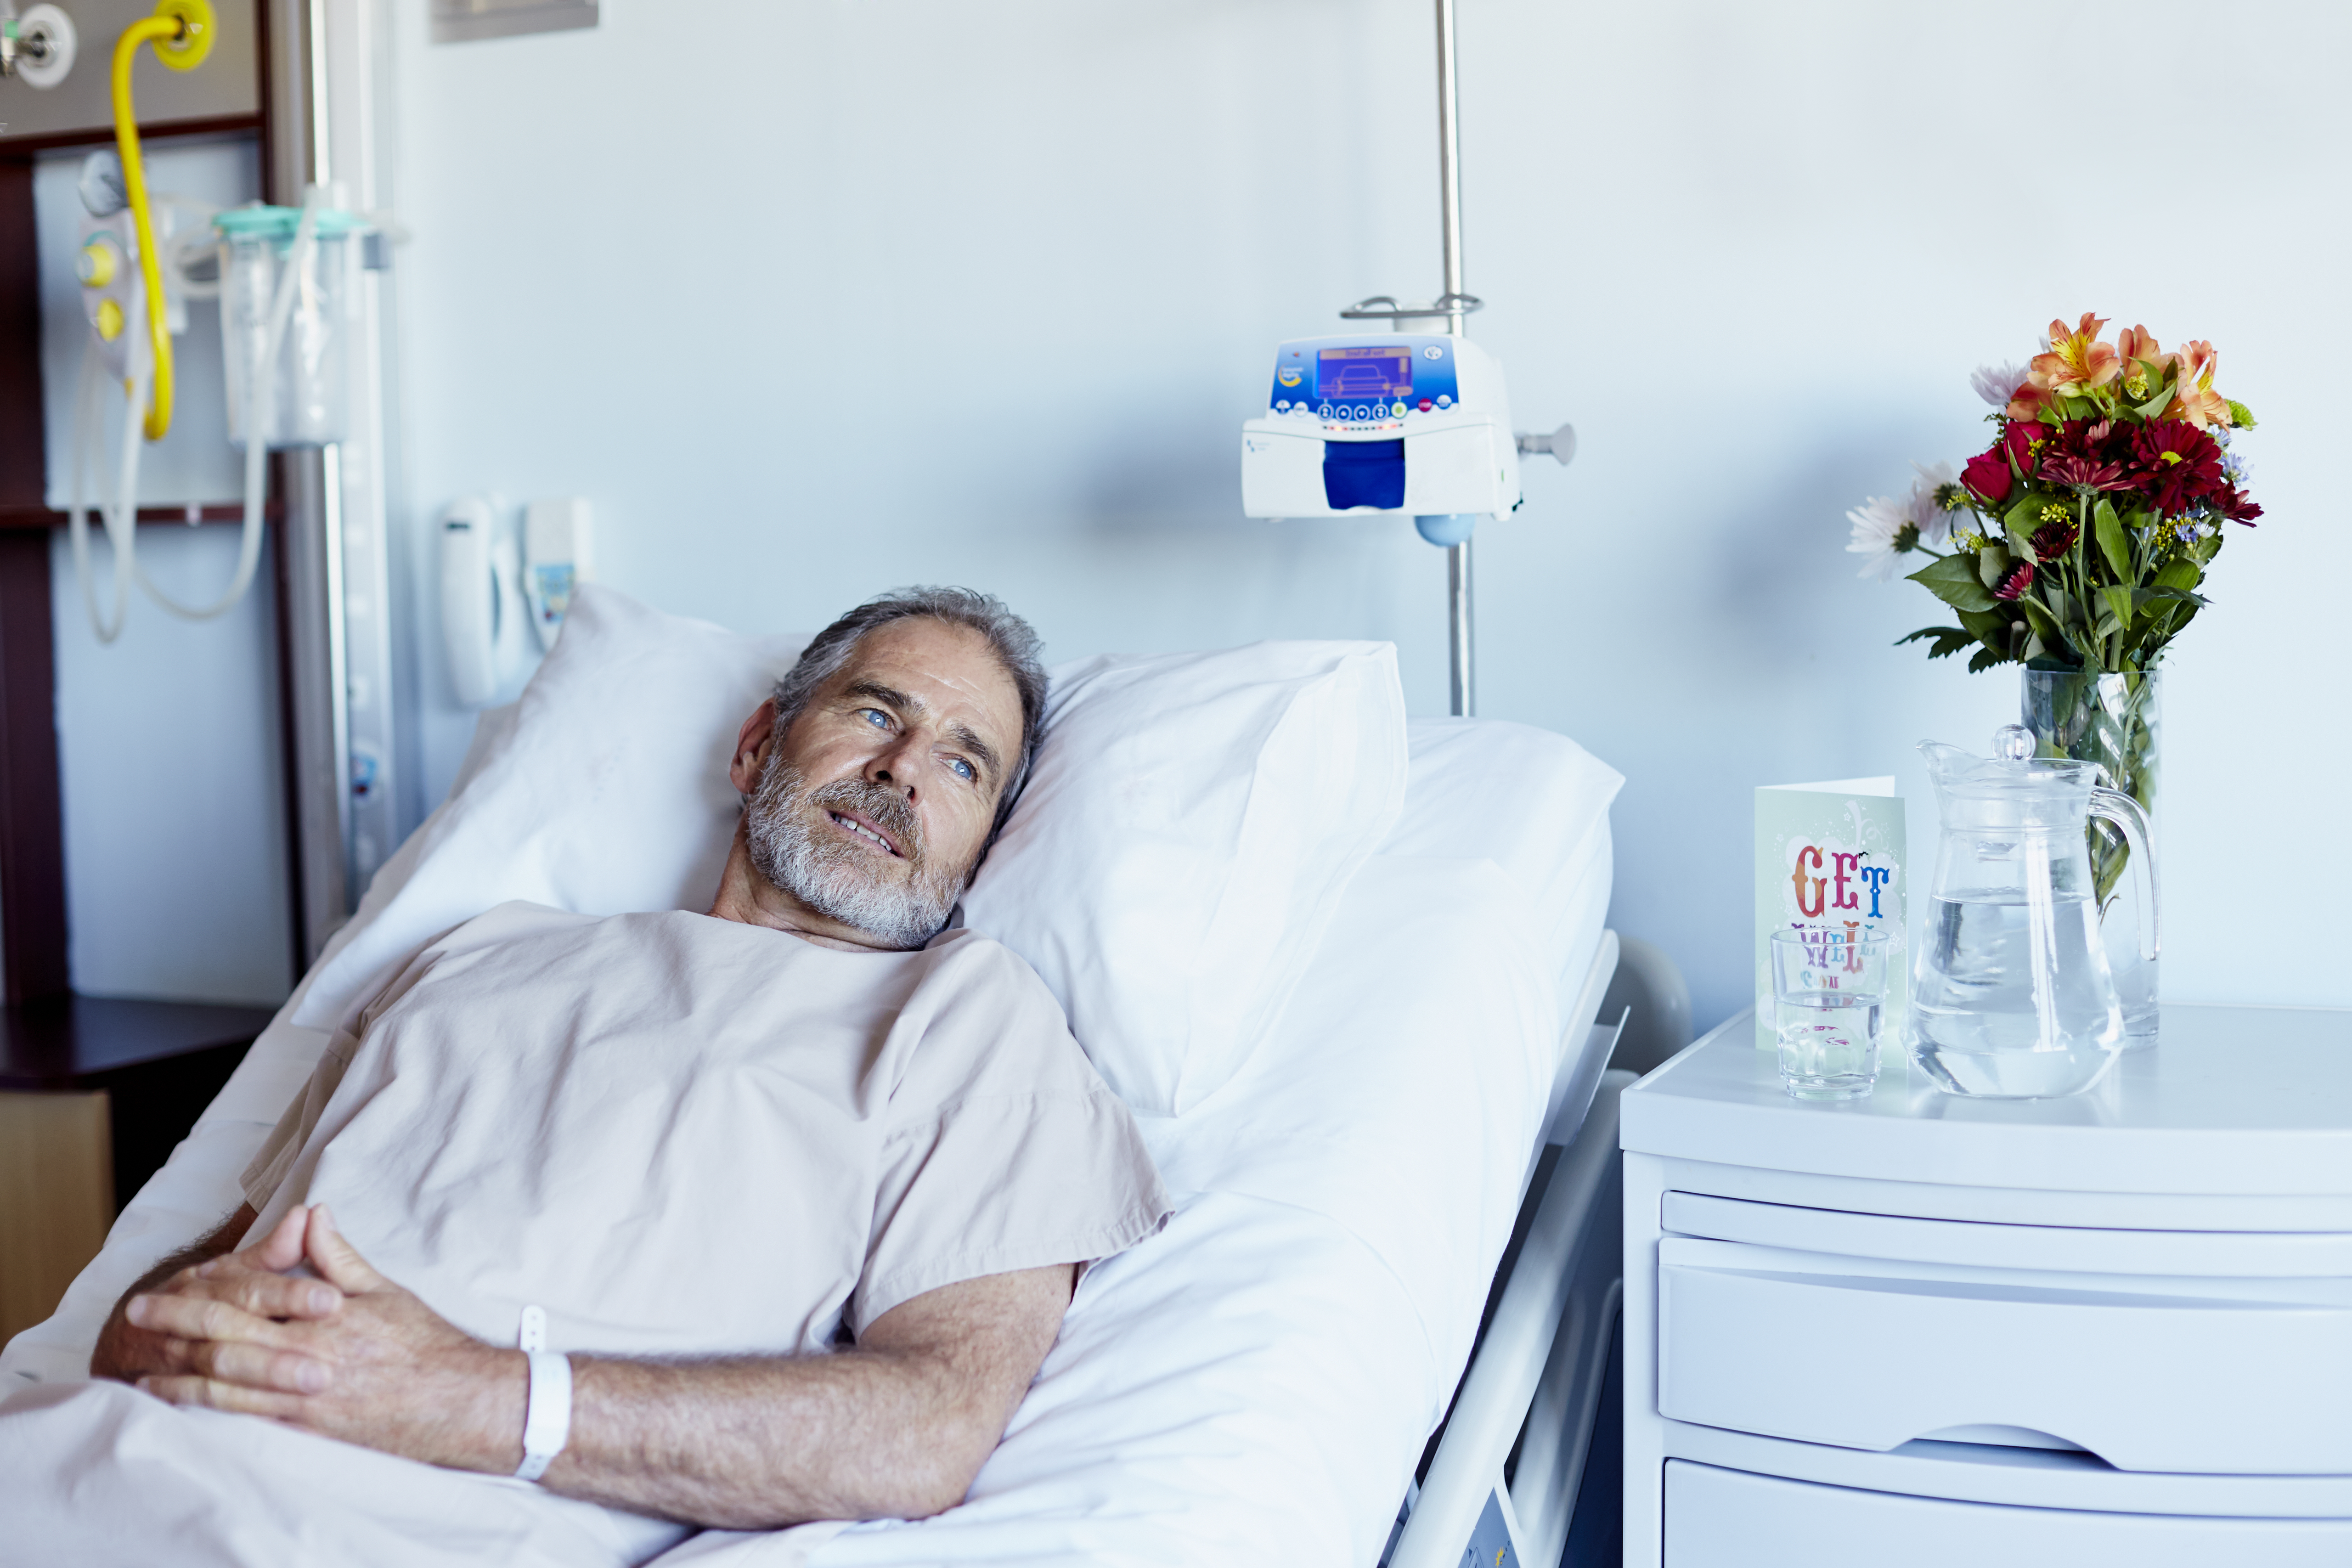 Thoughtful man relaxing in hospital ward | Source: Getty Images